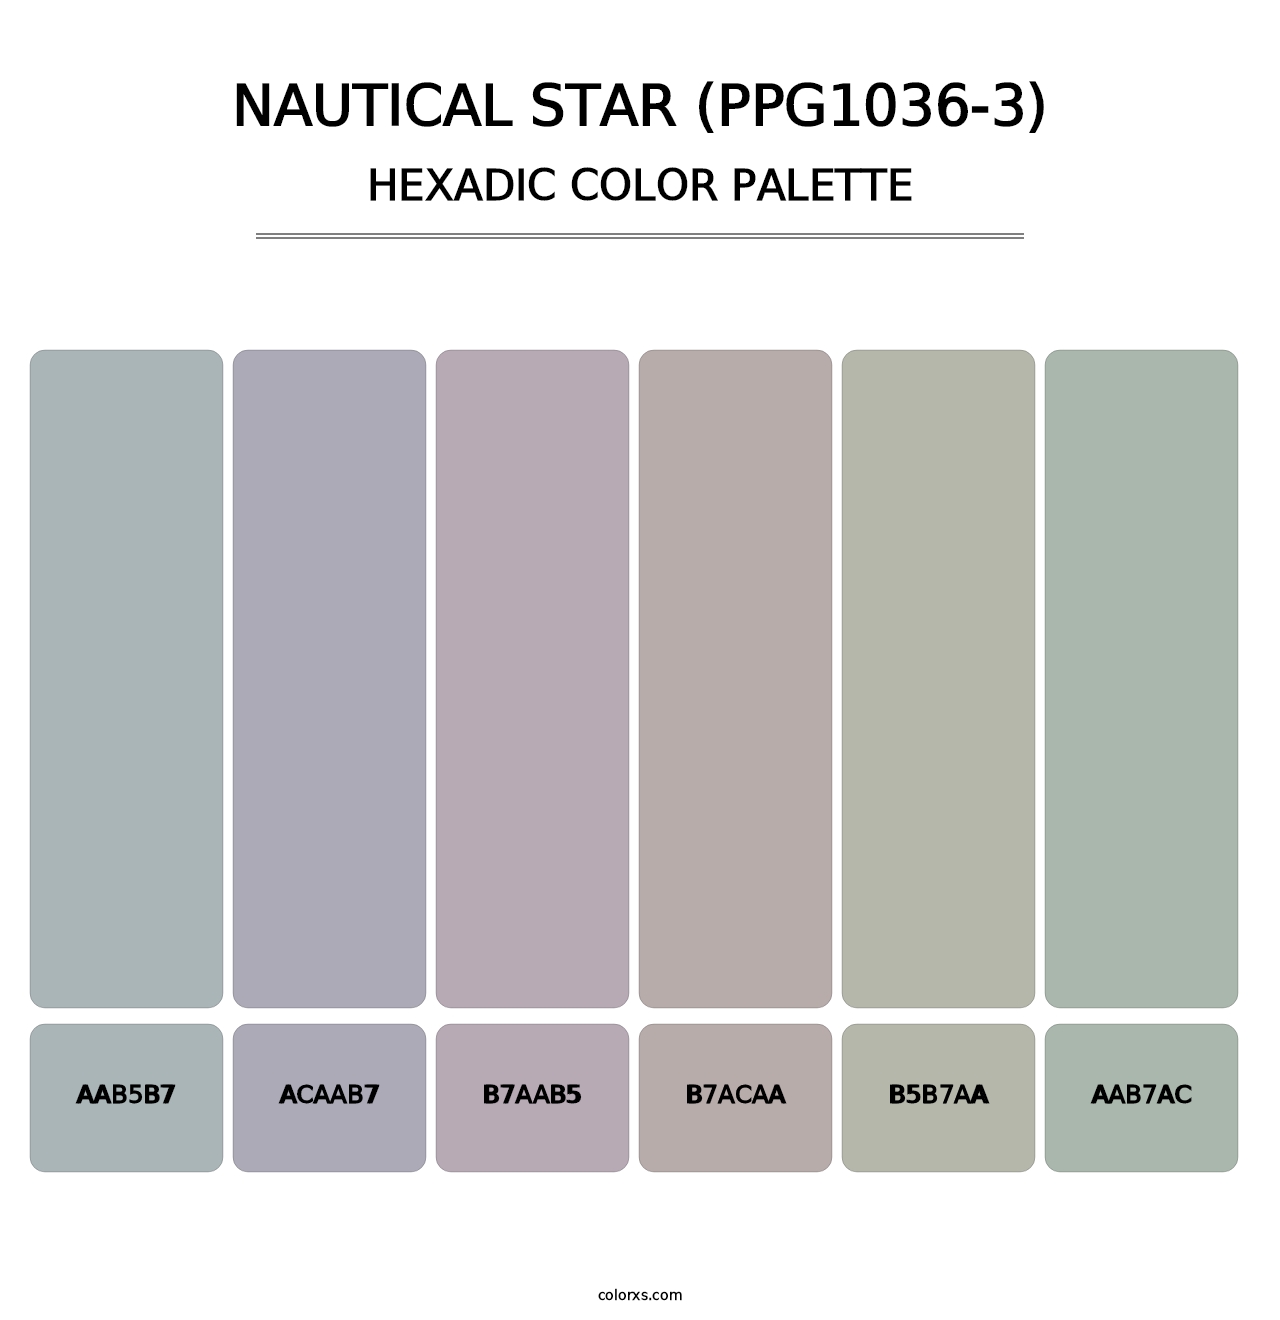 Nautical Star (PPG1036-3) - Hexadic Color Palette